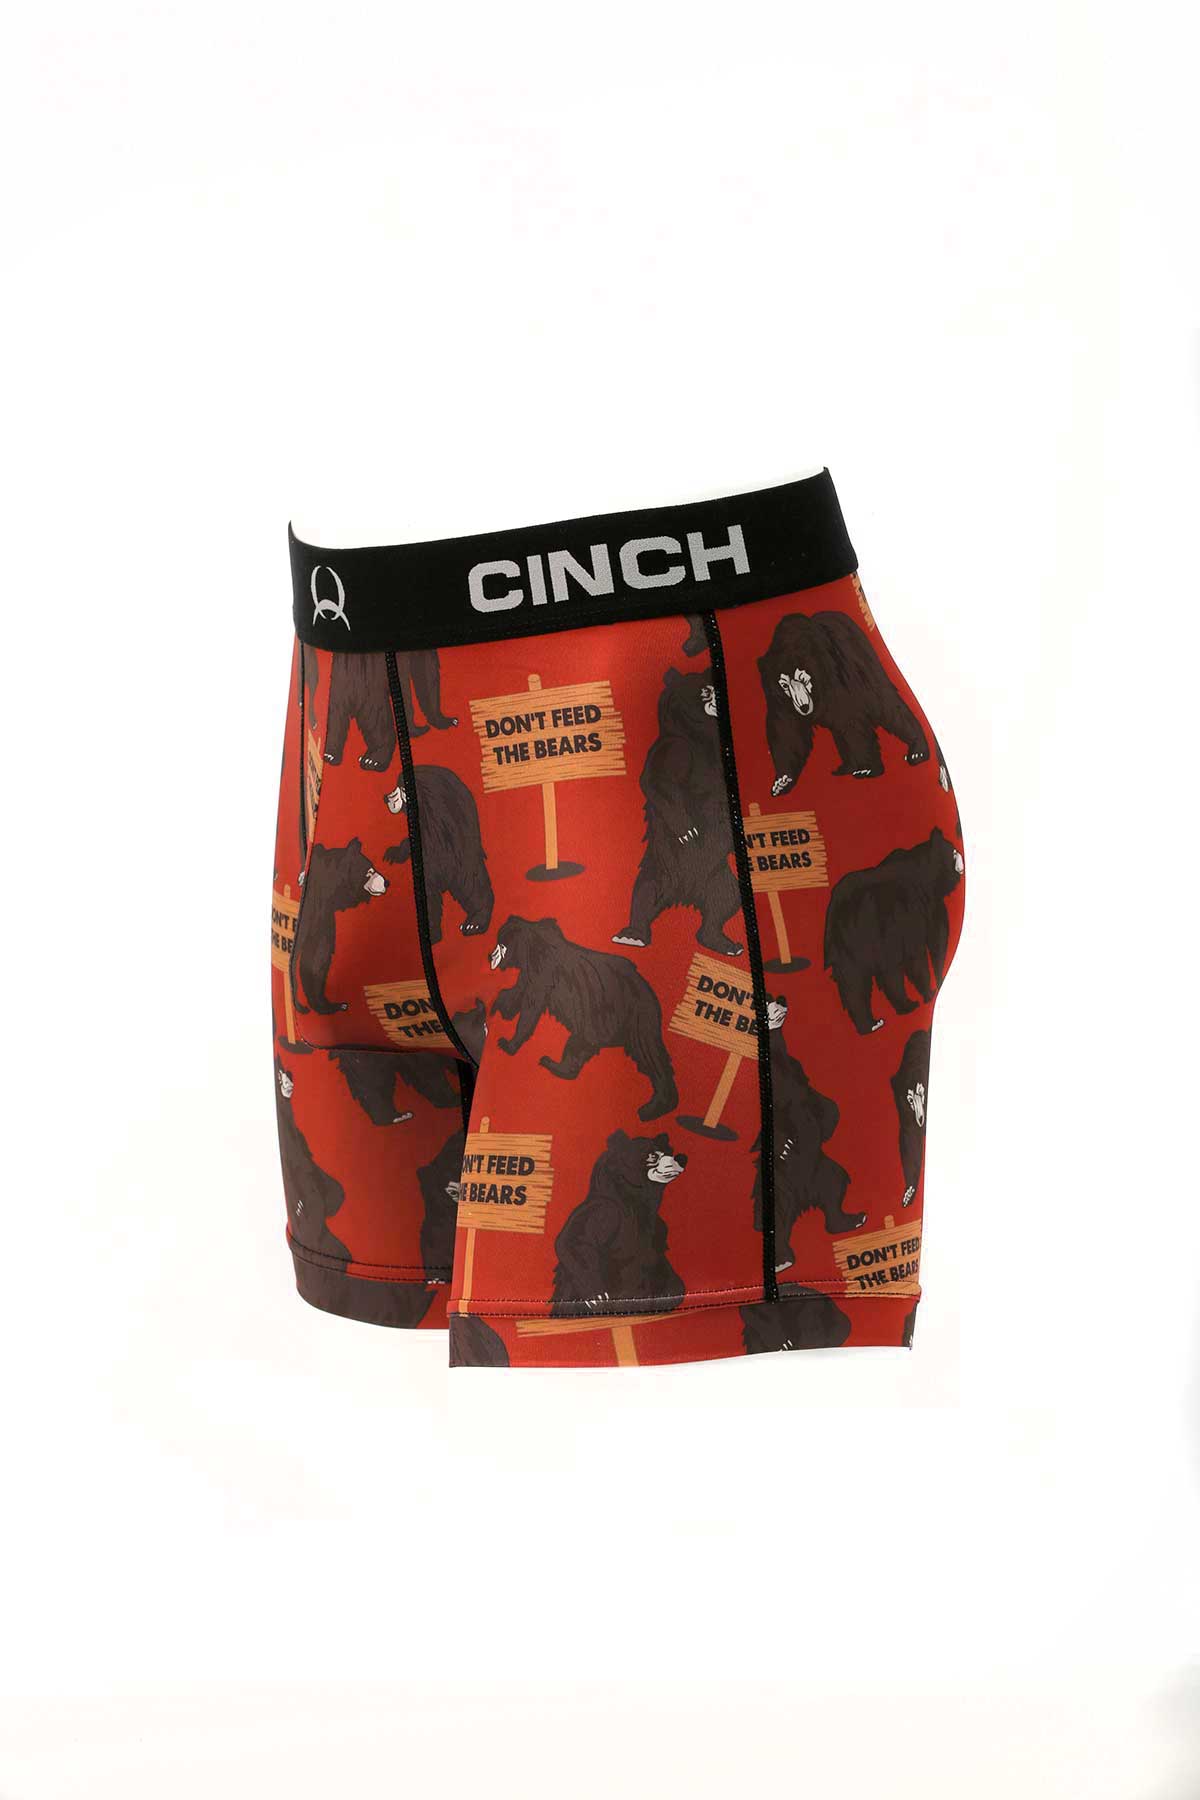 Don't Feed The Bears' Men's Boxer Brief by Cinch® – Stone Creek